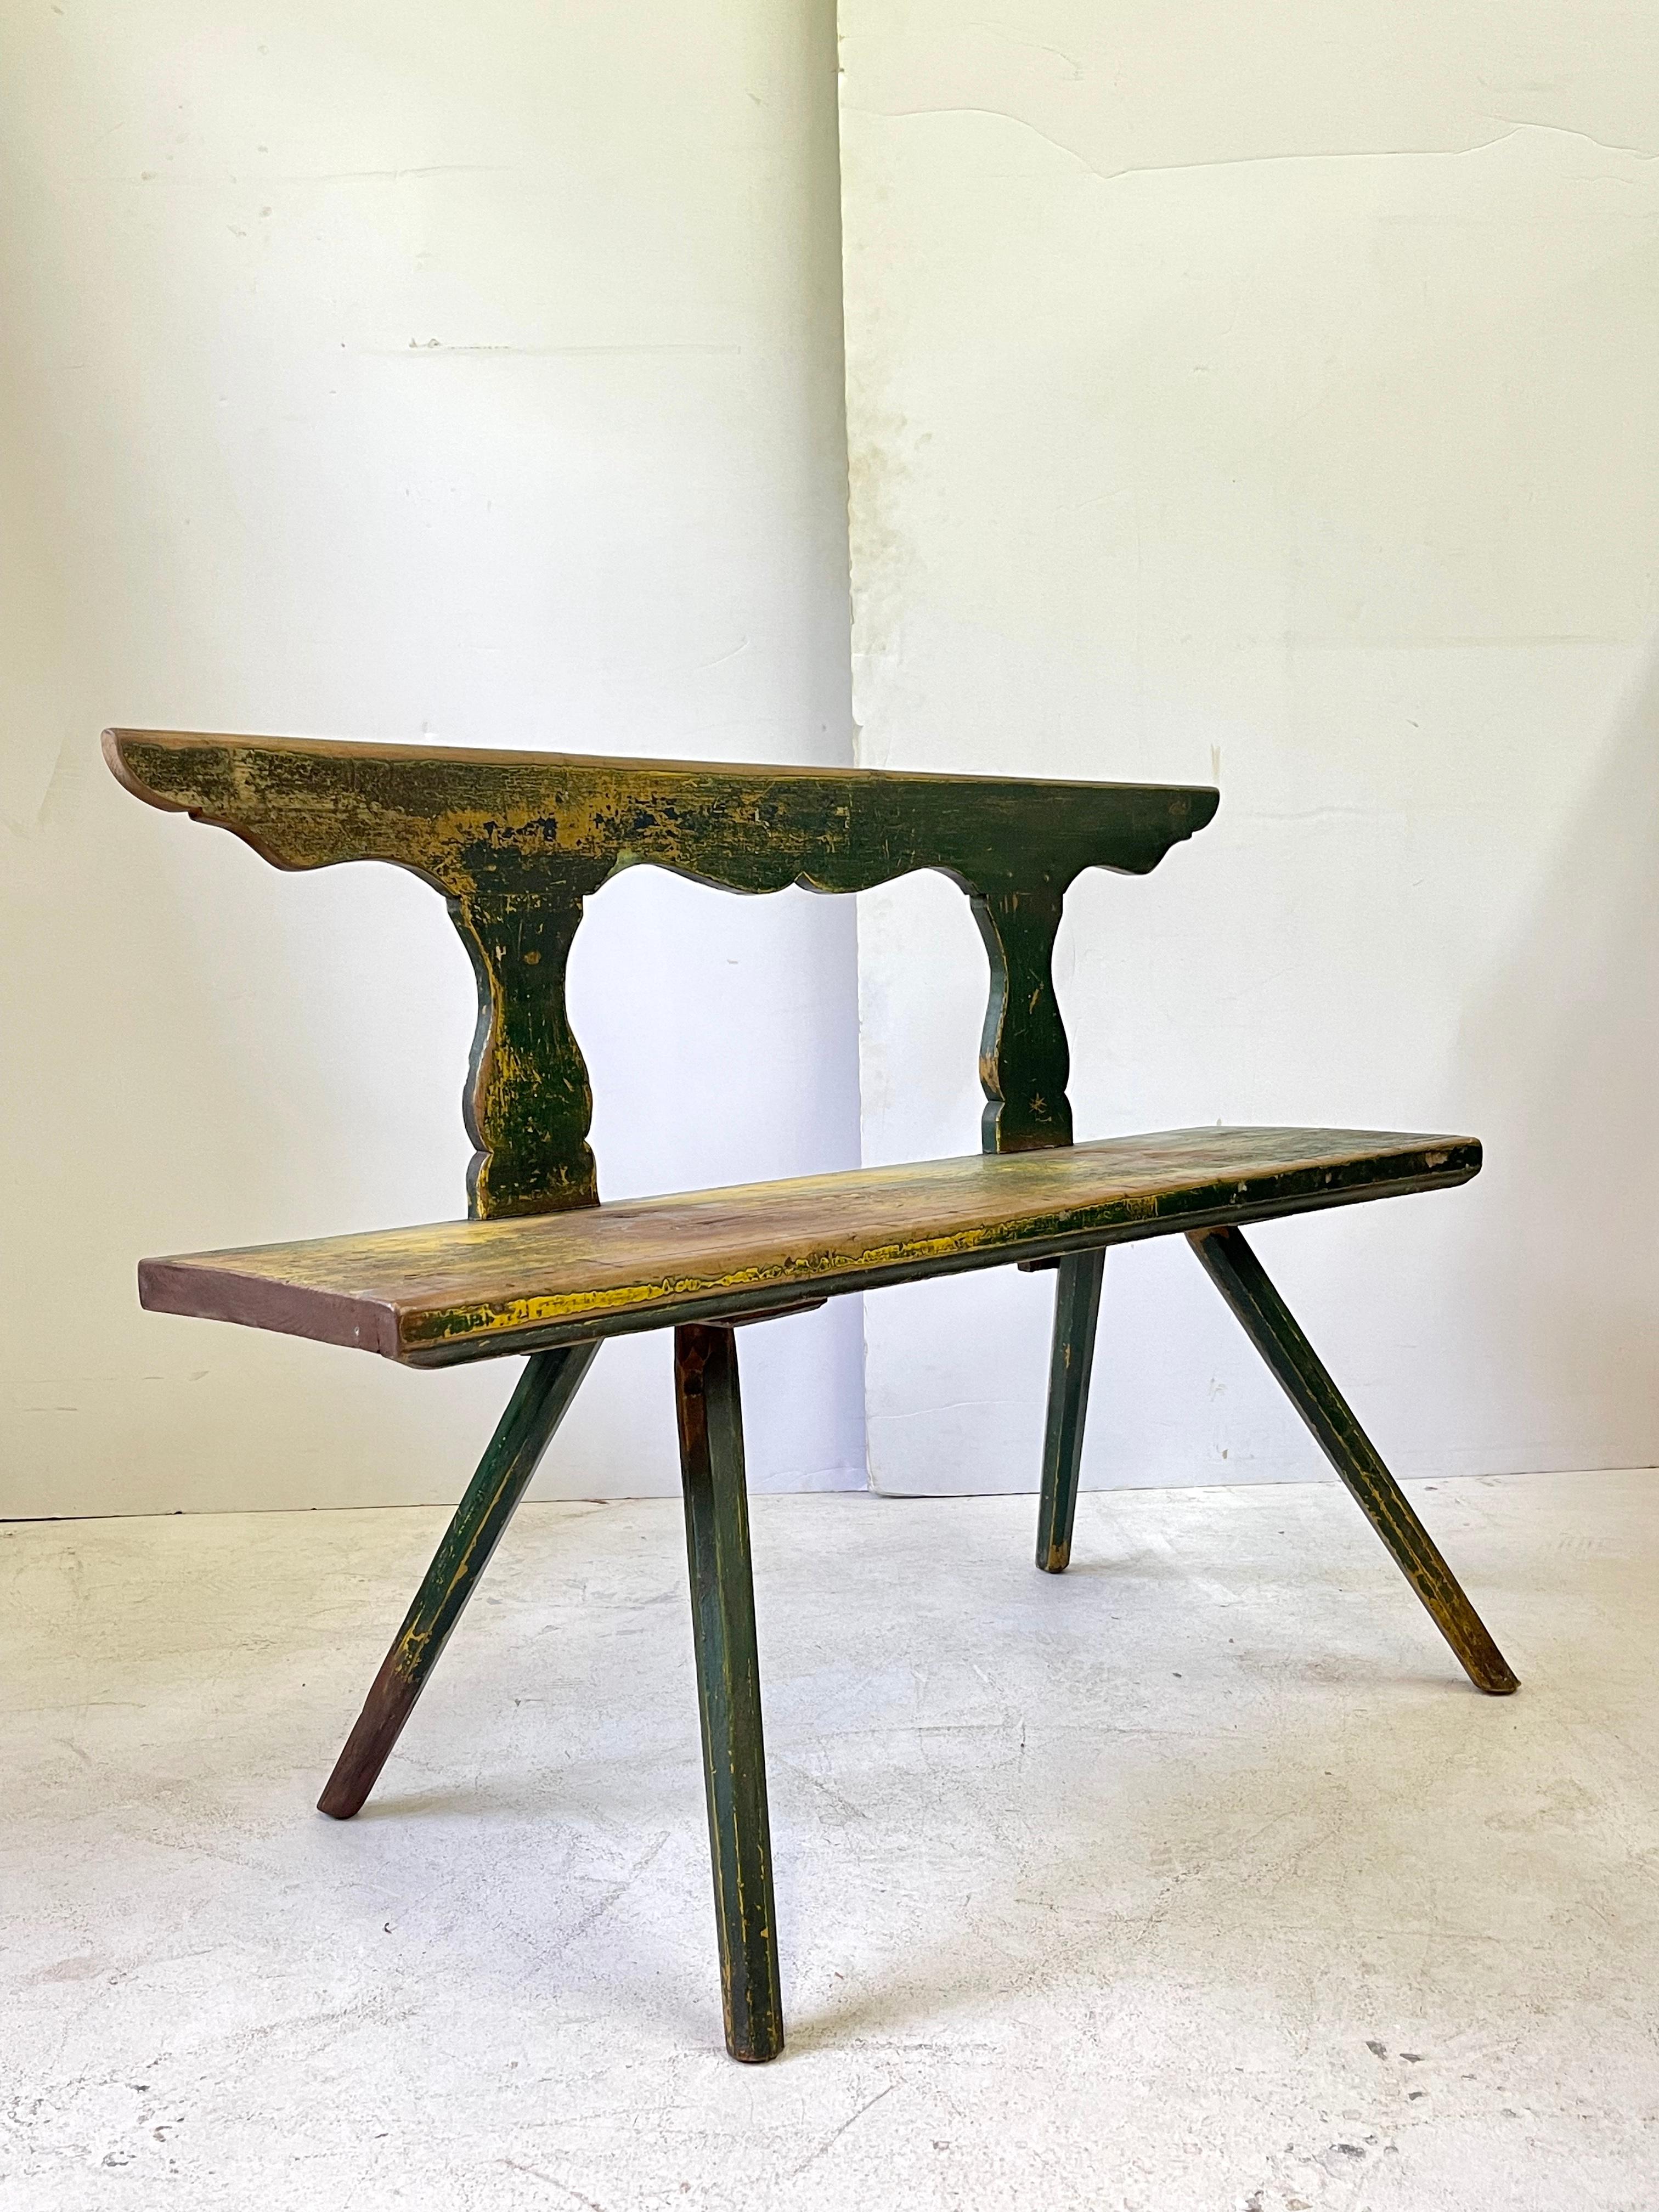 Primitive 19th Century Rustic Italian Bench in Green and Yellow Paint